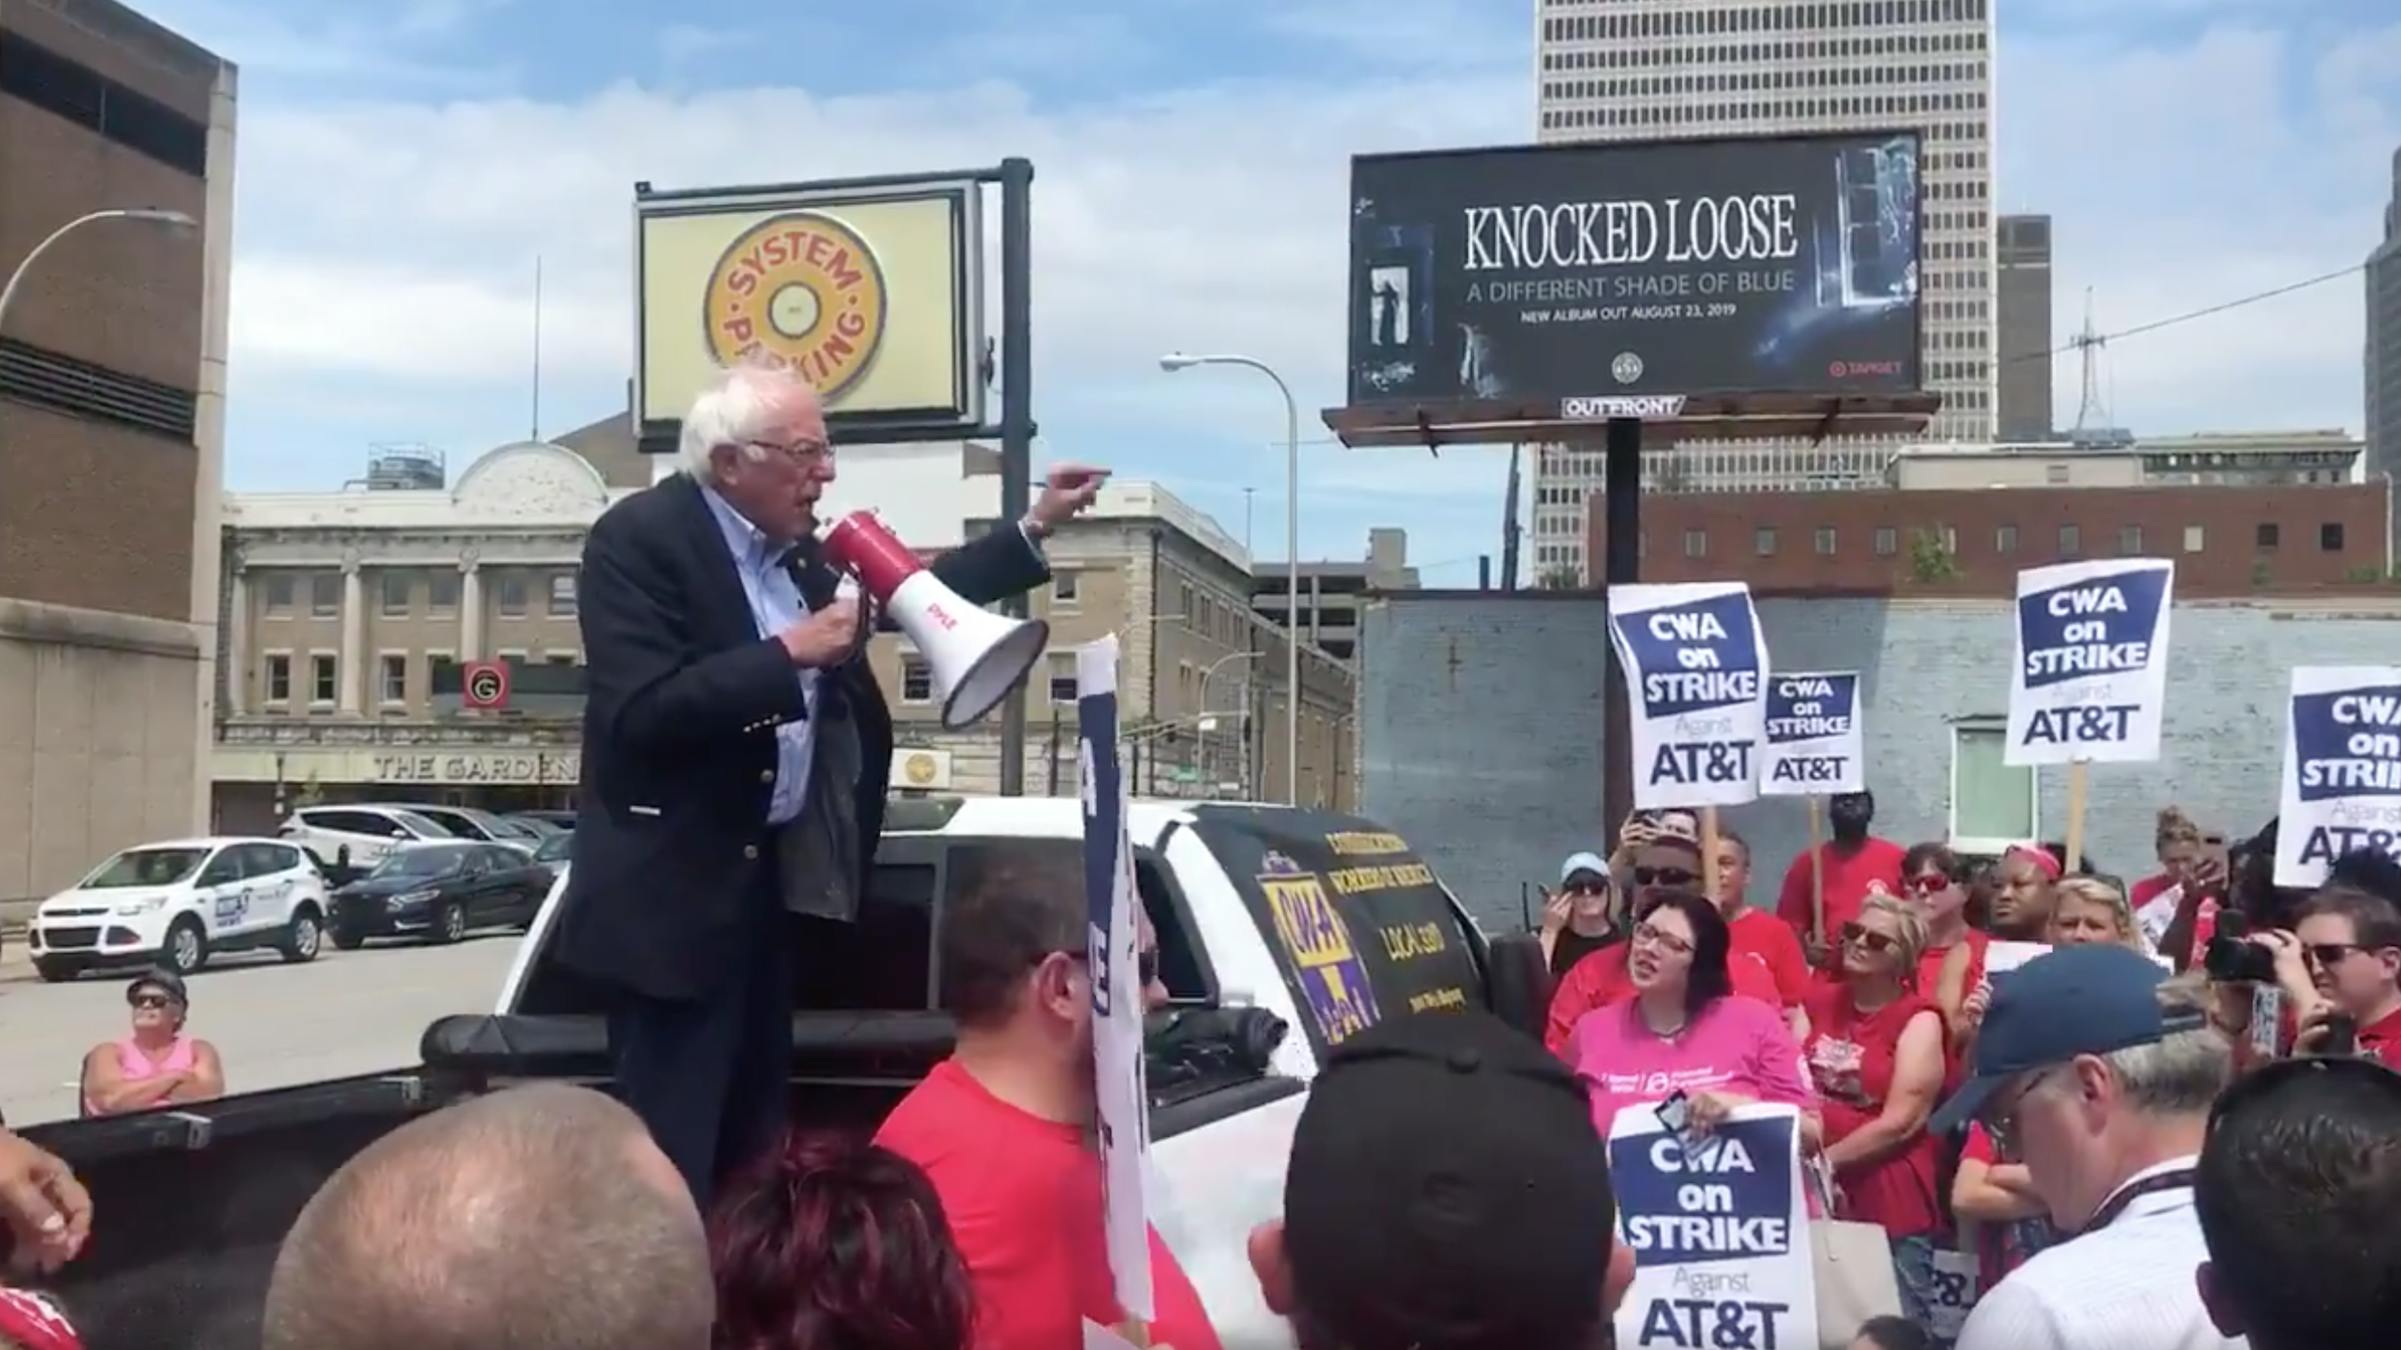 A Knocked Loose Billboard Made A Surprise Appearance At A Bernie Rally